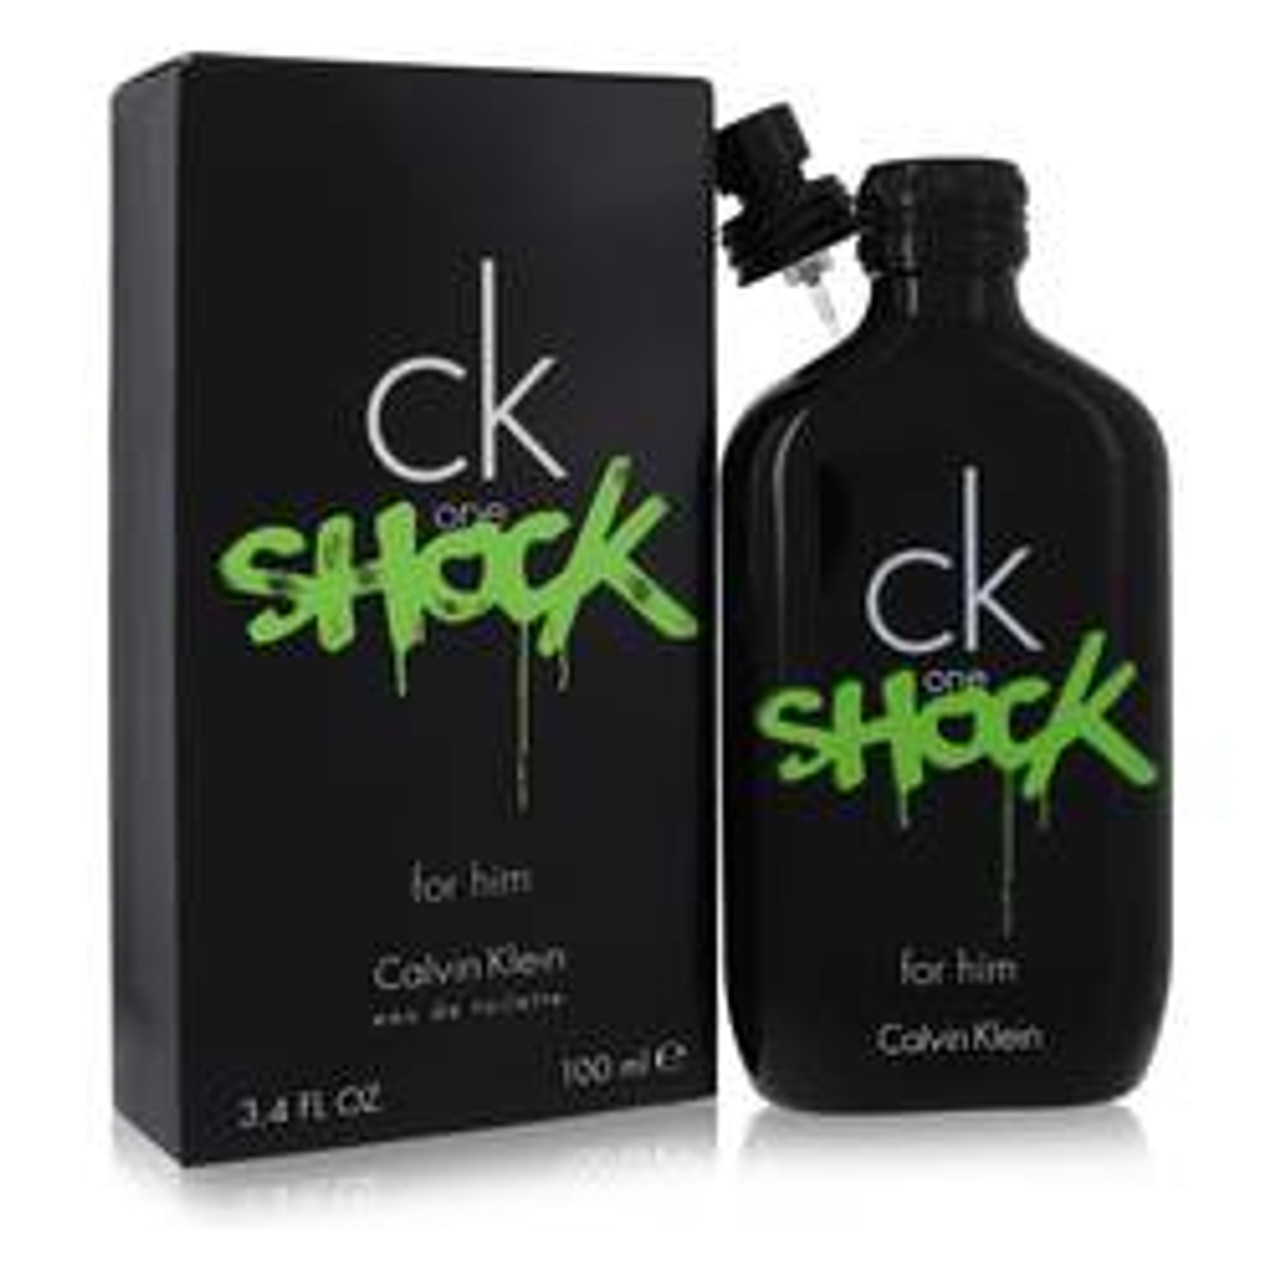 Ck One Shock Cologne By Calvin Klein Eau De Toilette Spray 3.4 oz for Men - [From 71.00 - Choose pk Qty ] - *Ships from Miami